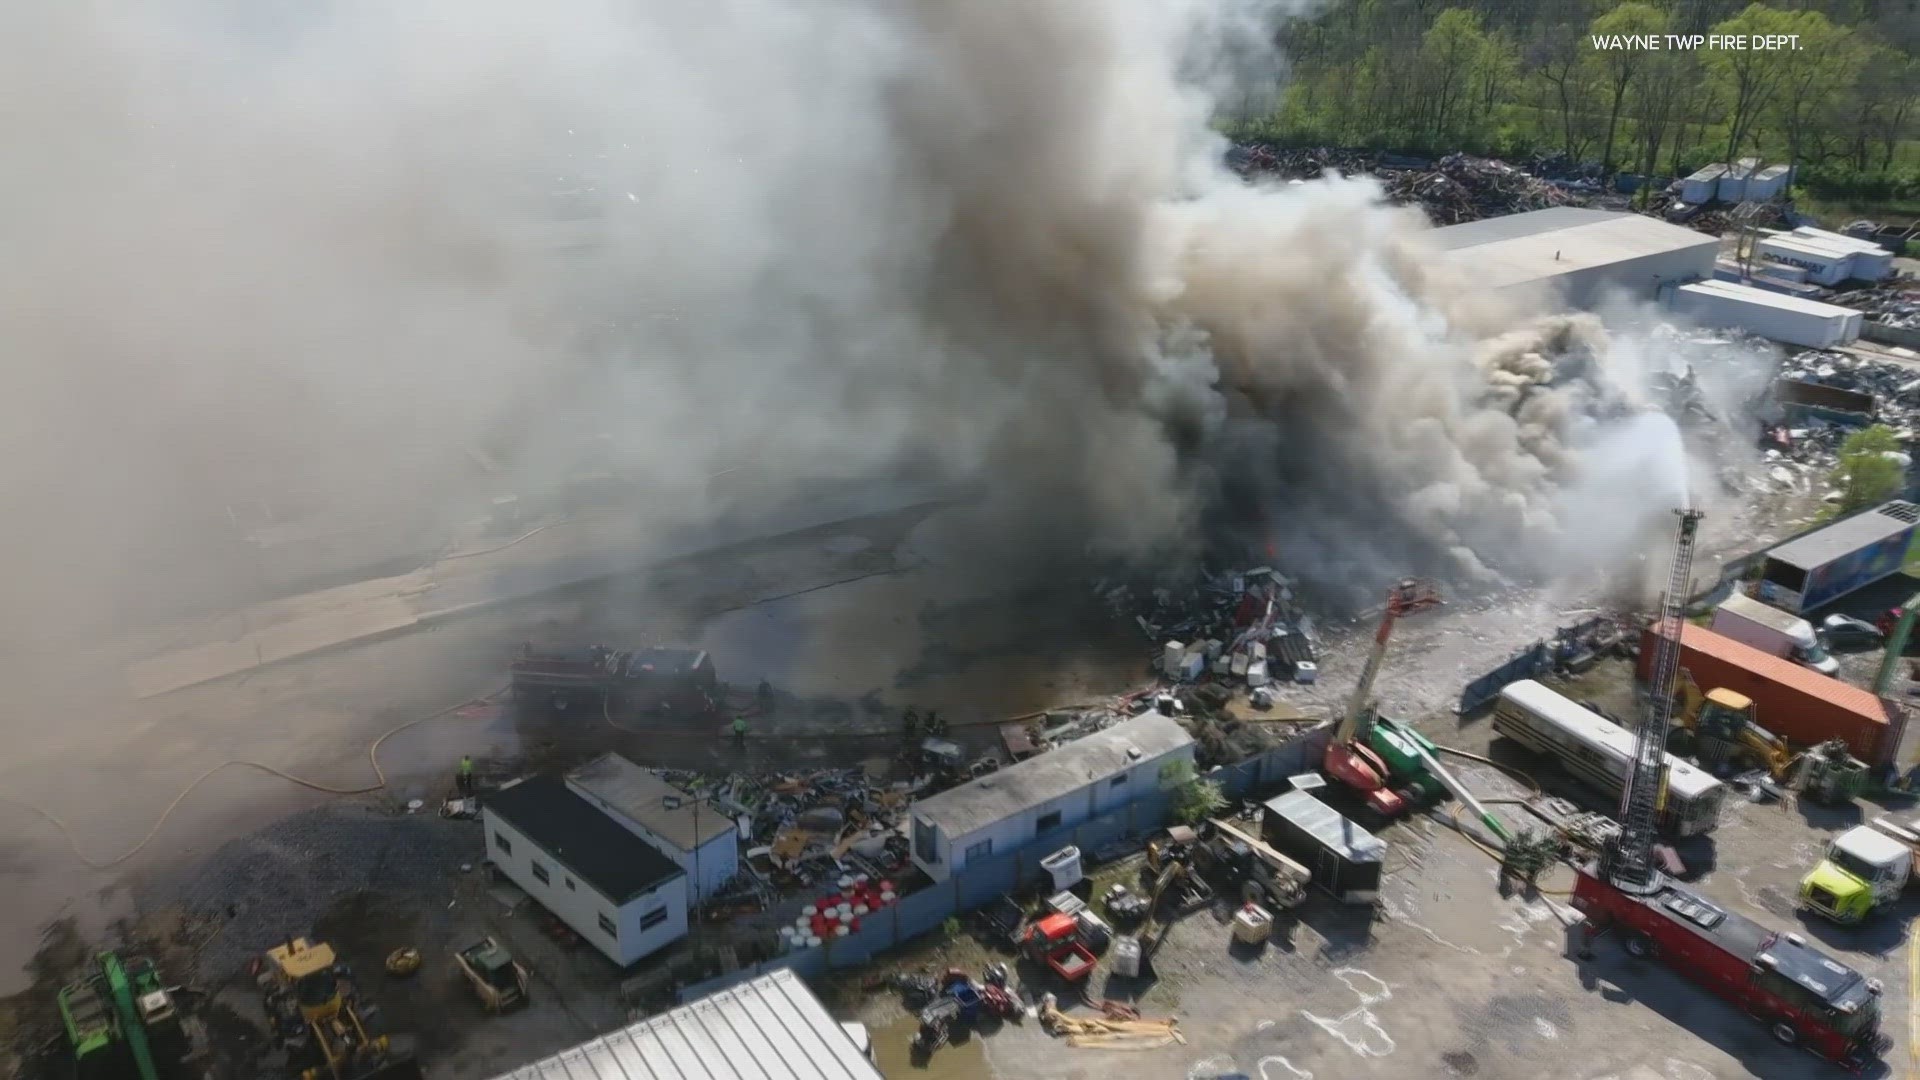 No injuries were reported and the fire remains under investigation. The fire broke out around 3:30 p.m. Saturday at Zore's Recycling.